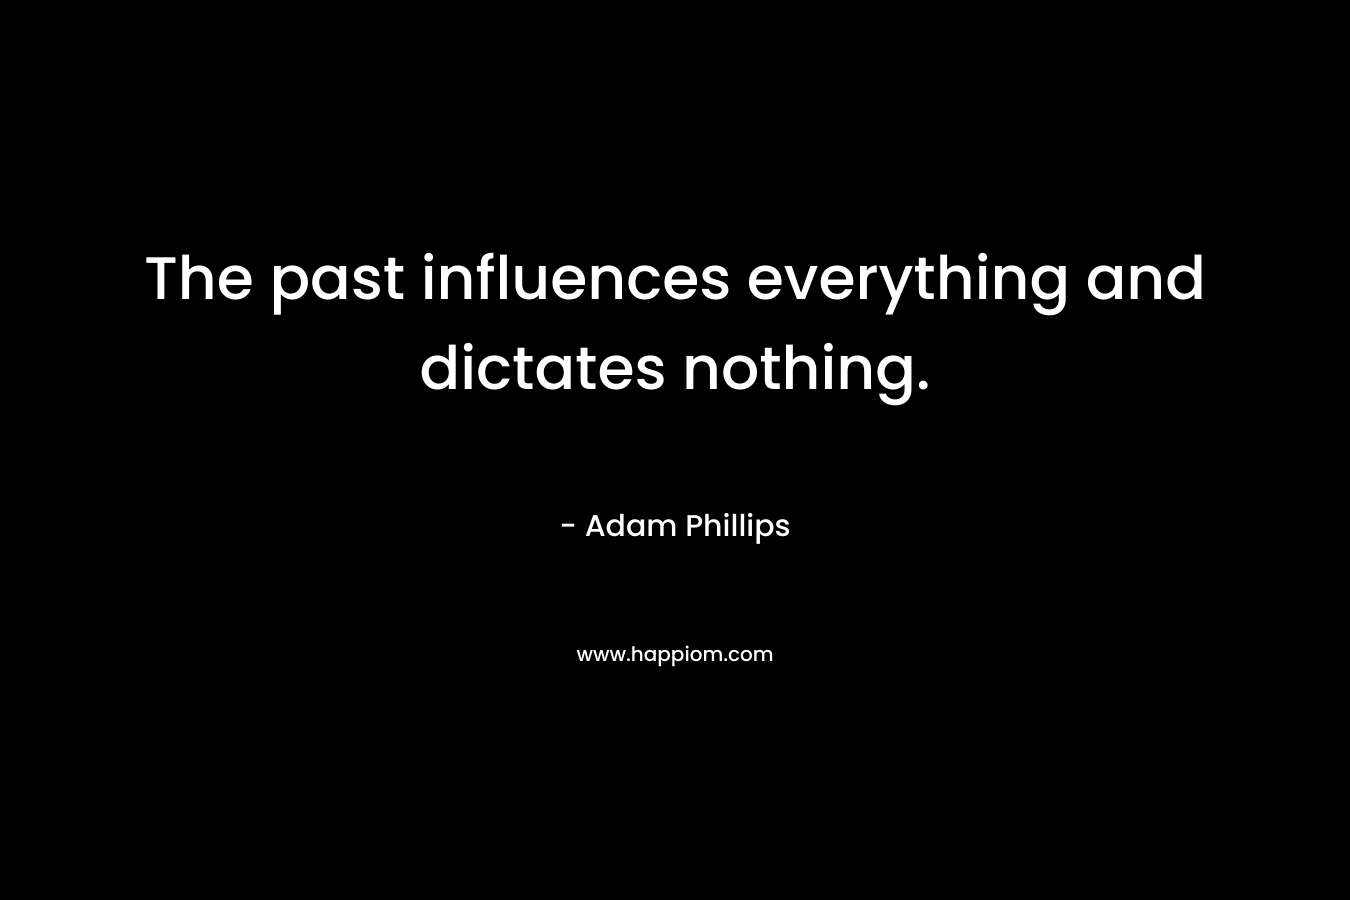 The past influences everything and dictates nothing. – Adam Phillips